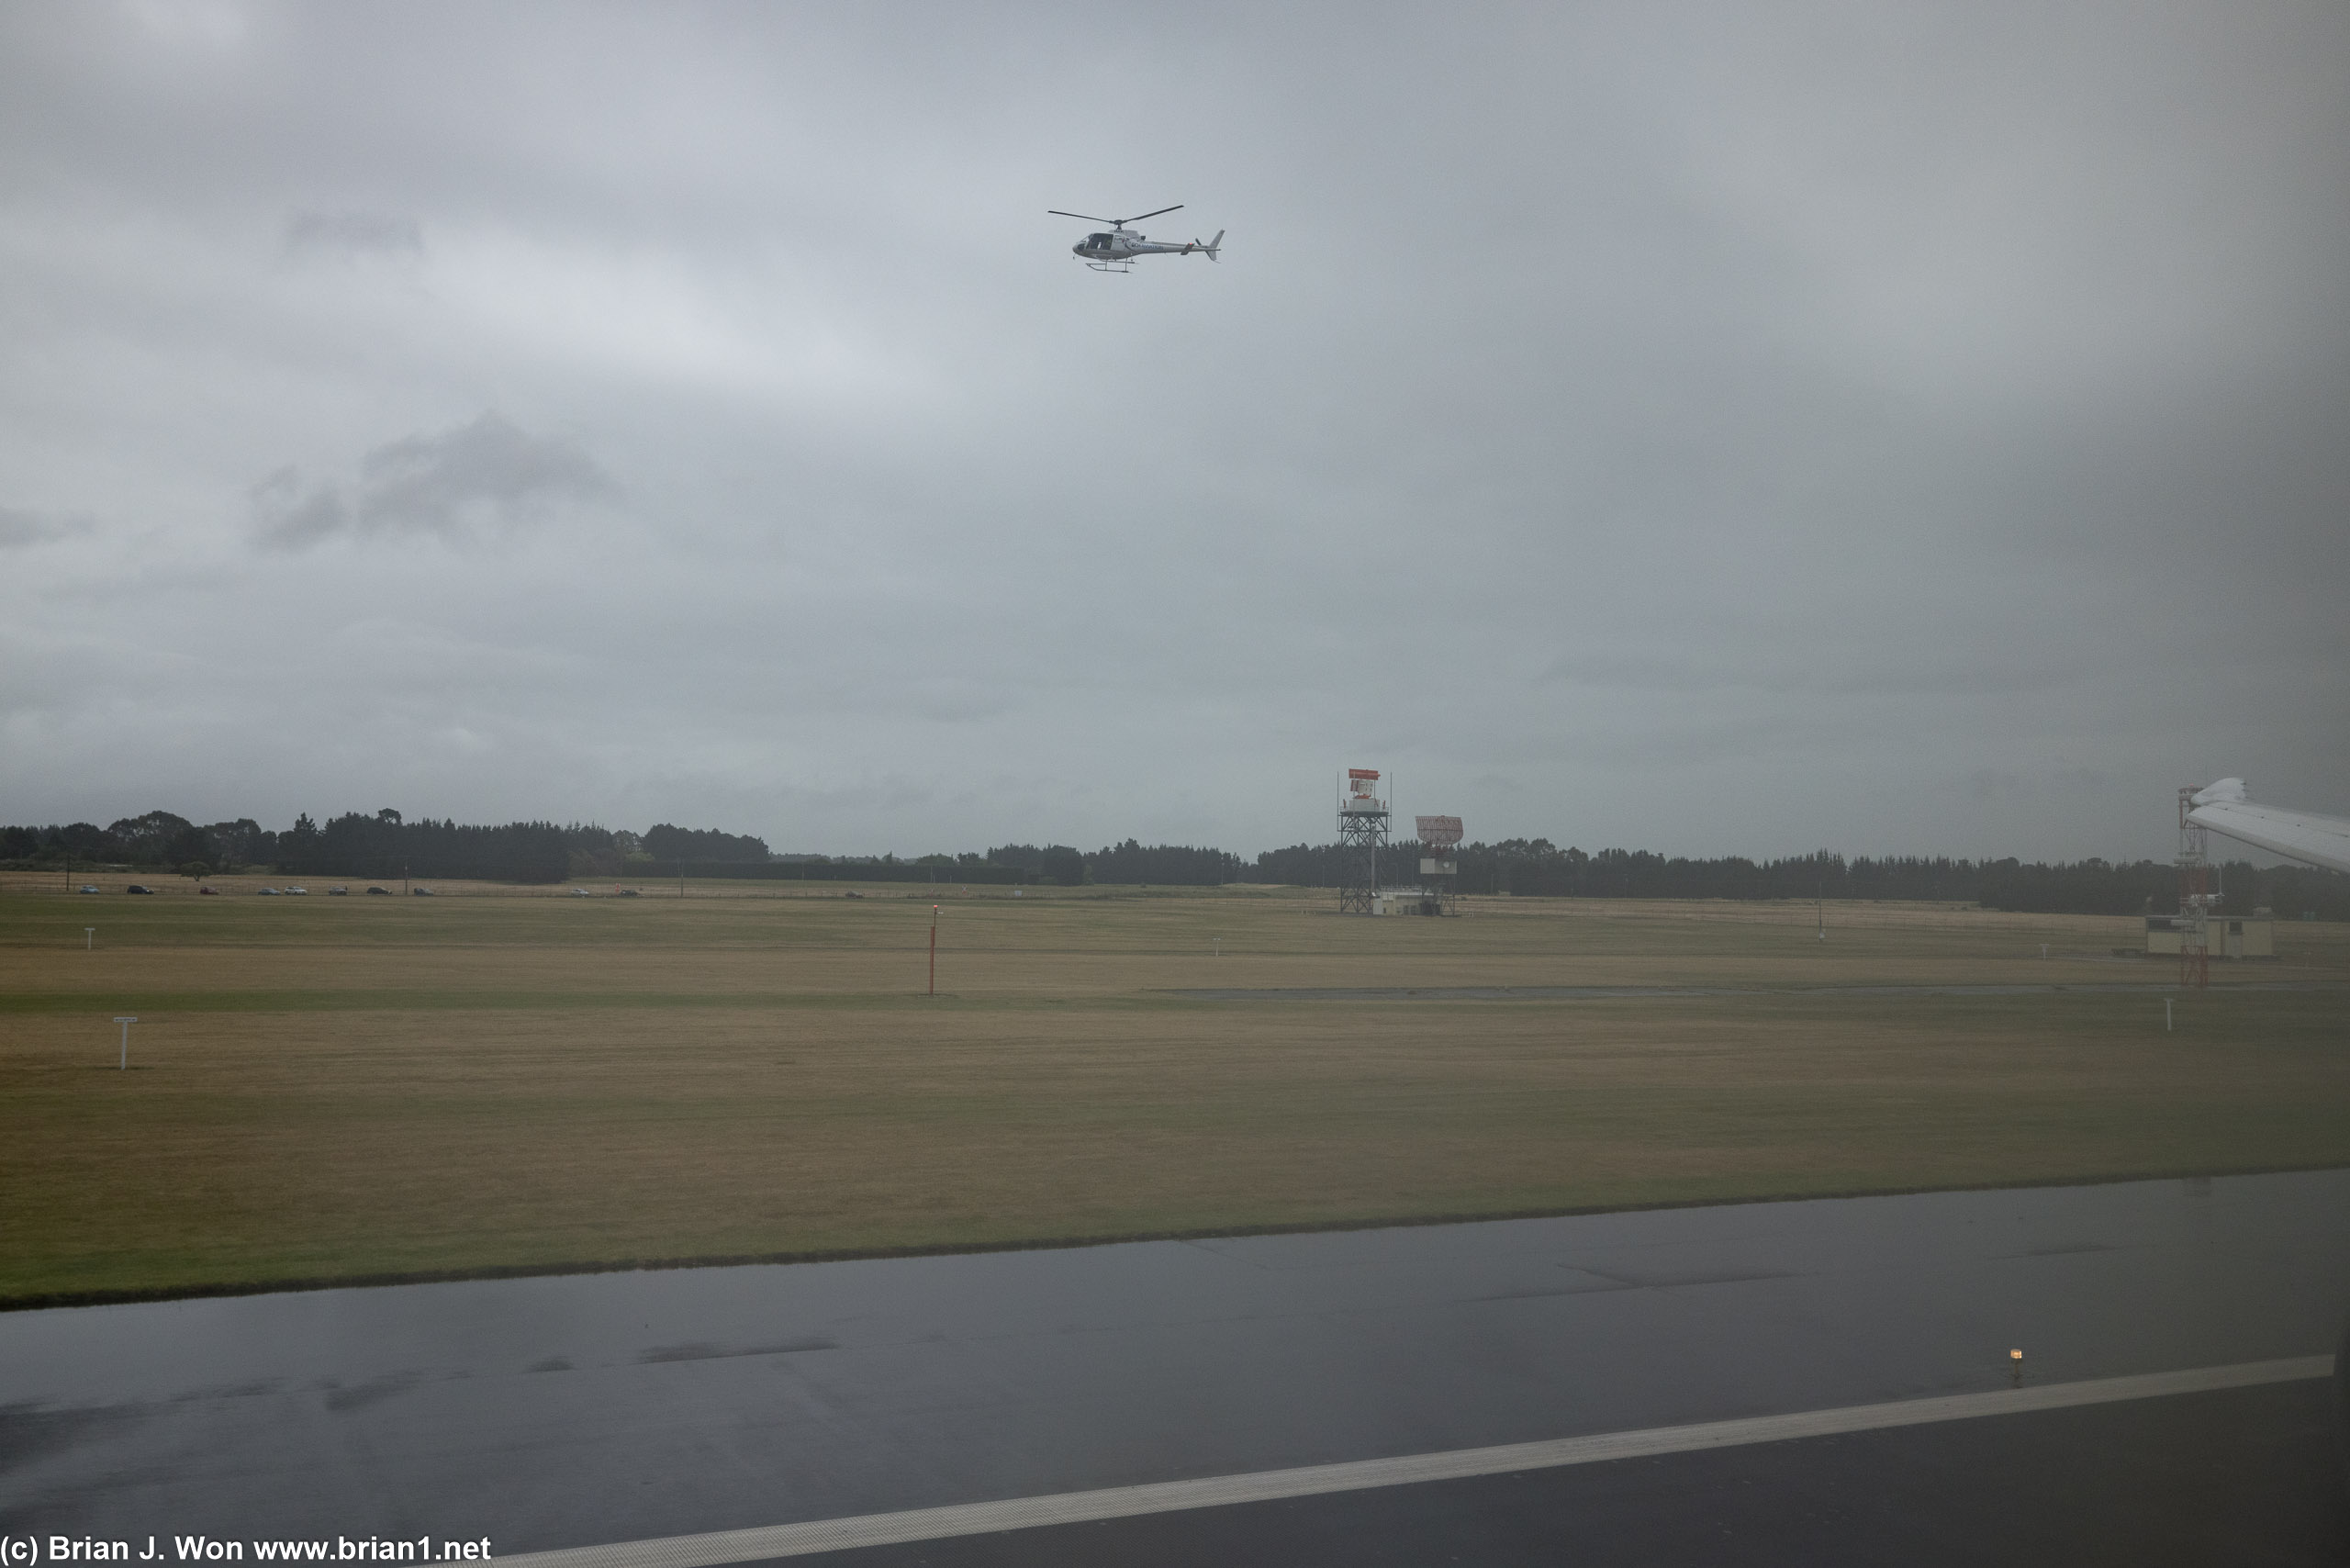 One of the two helicopters recording the arrival of United's inaugural flight from SFO to Christchurch.